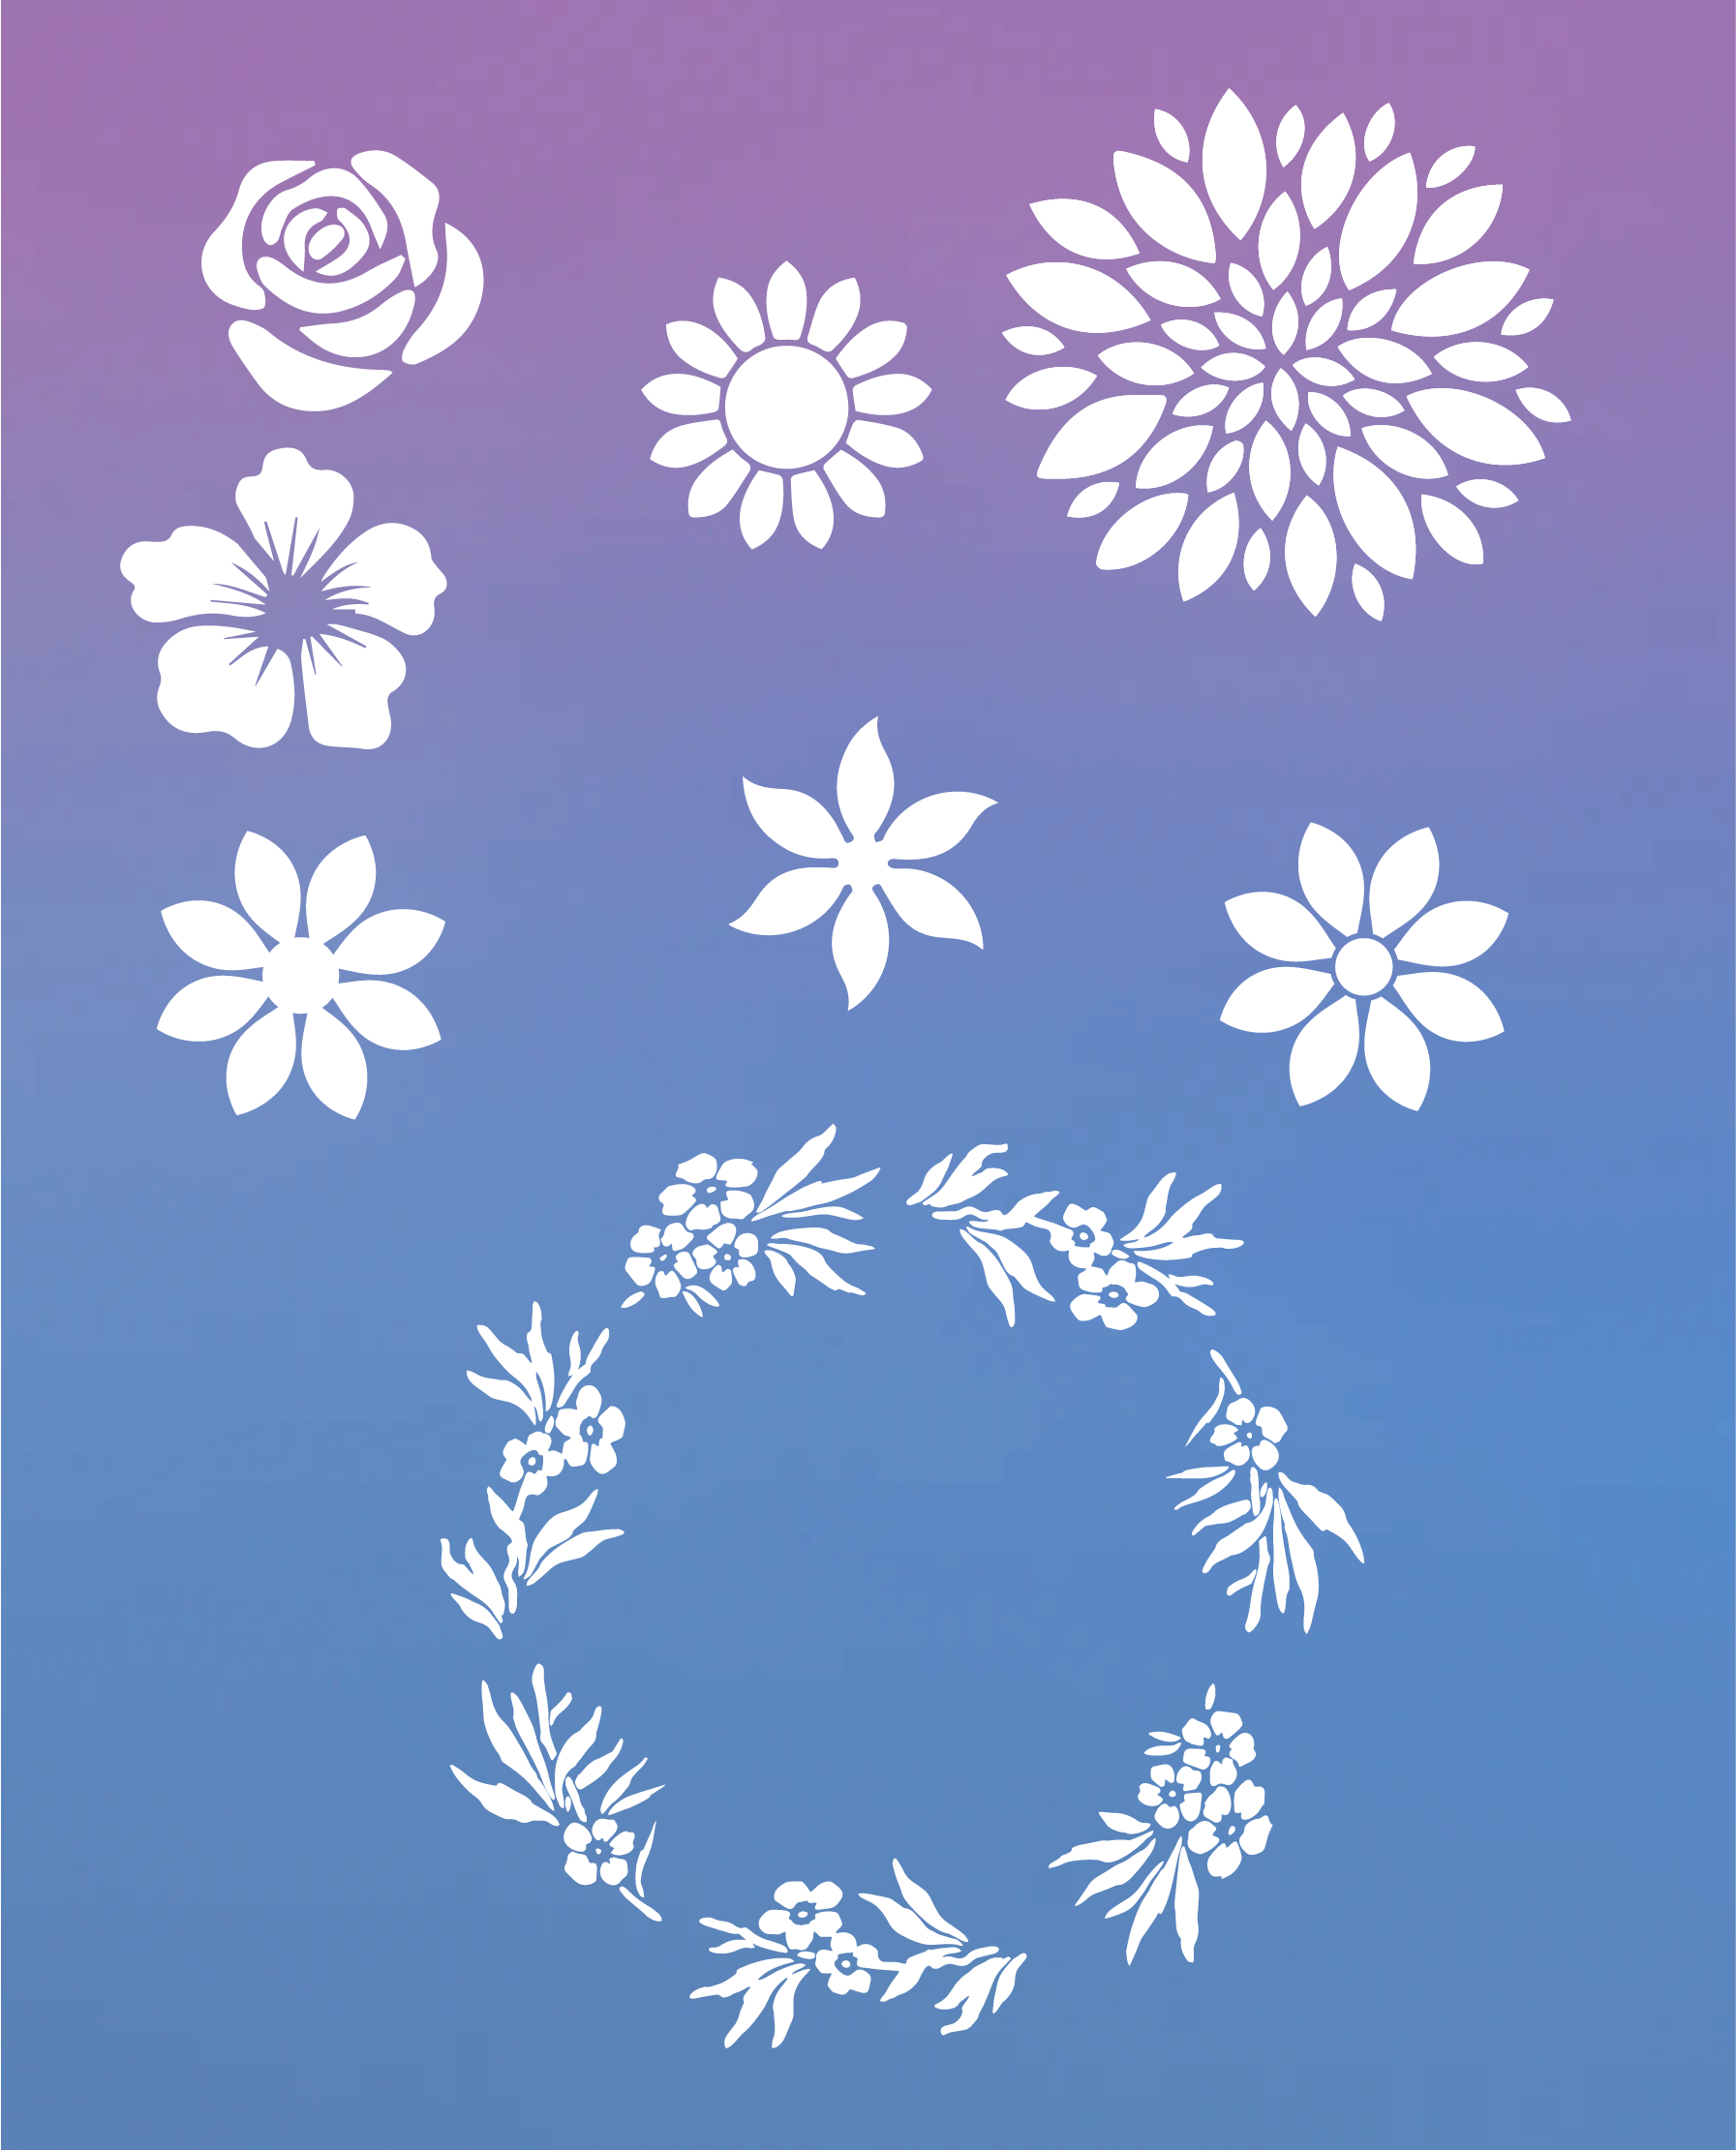 Free Printable Flower Stencil Designs And Templates intended for Free Printable Flower Stencils